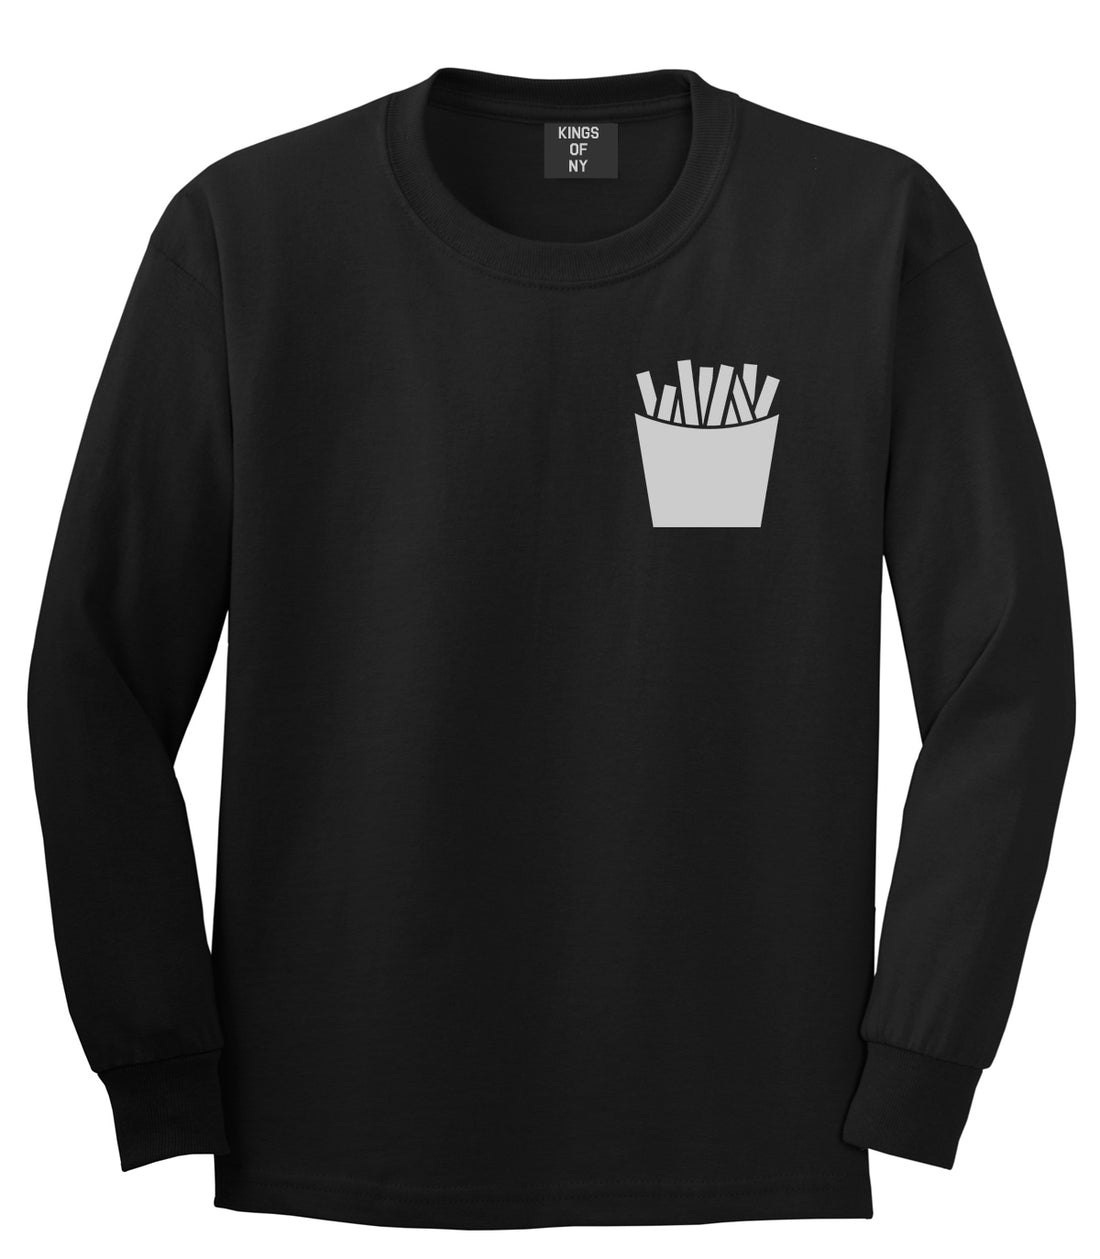 French Fry Fries Chest Mens Black Long Sleeve T-Shirt by KINGS OF NY